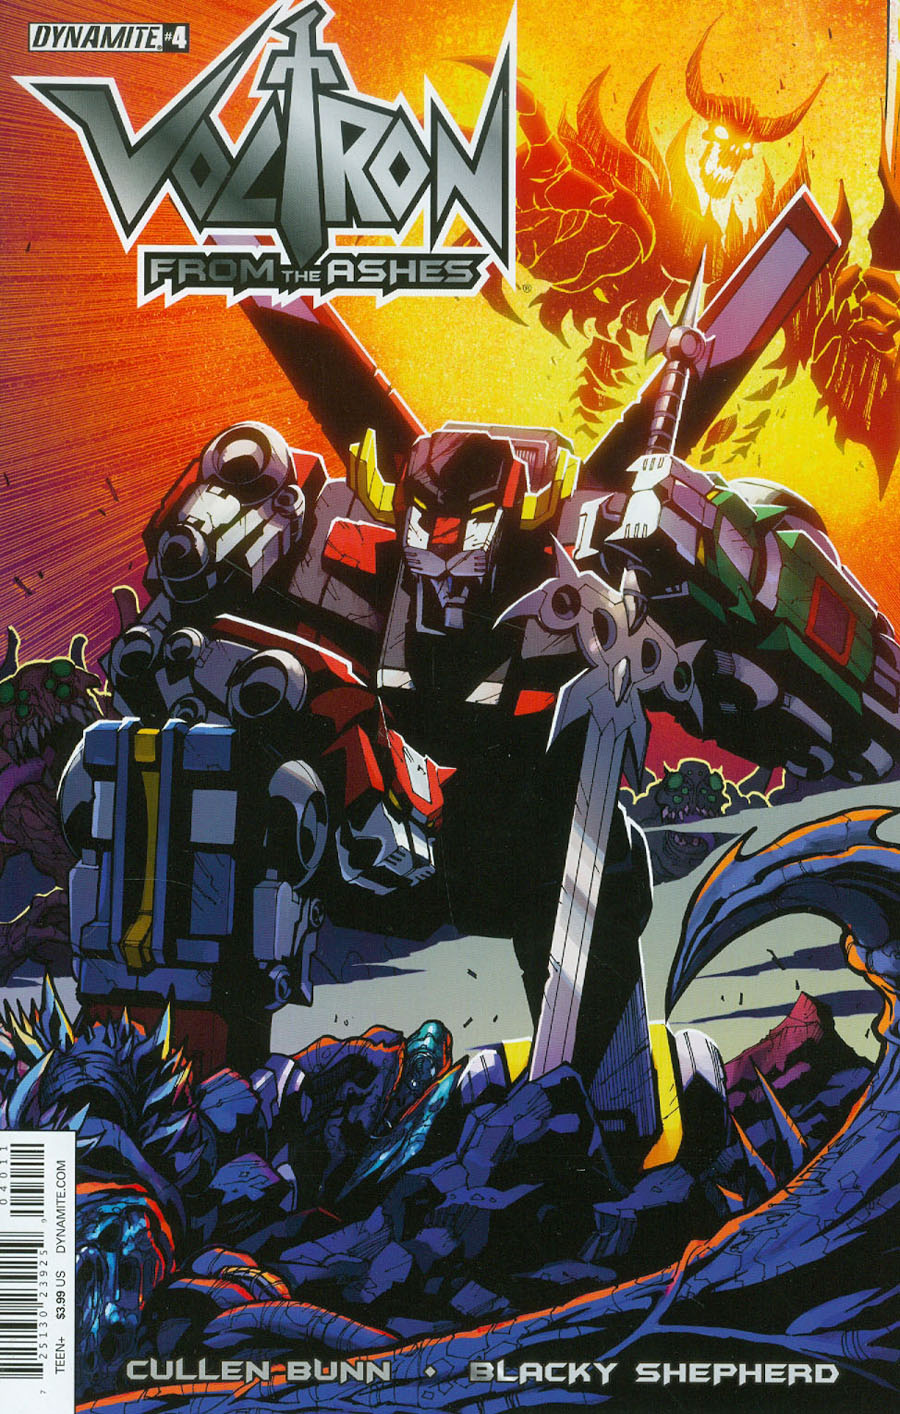 Voltron From The Ashes #4